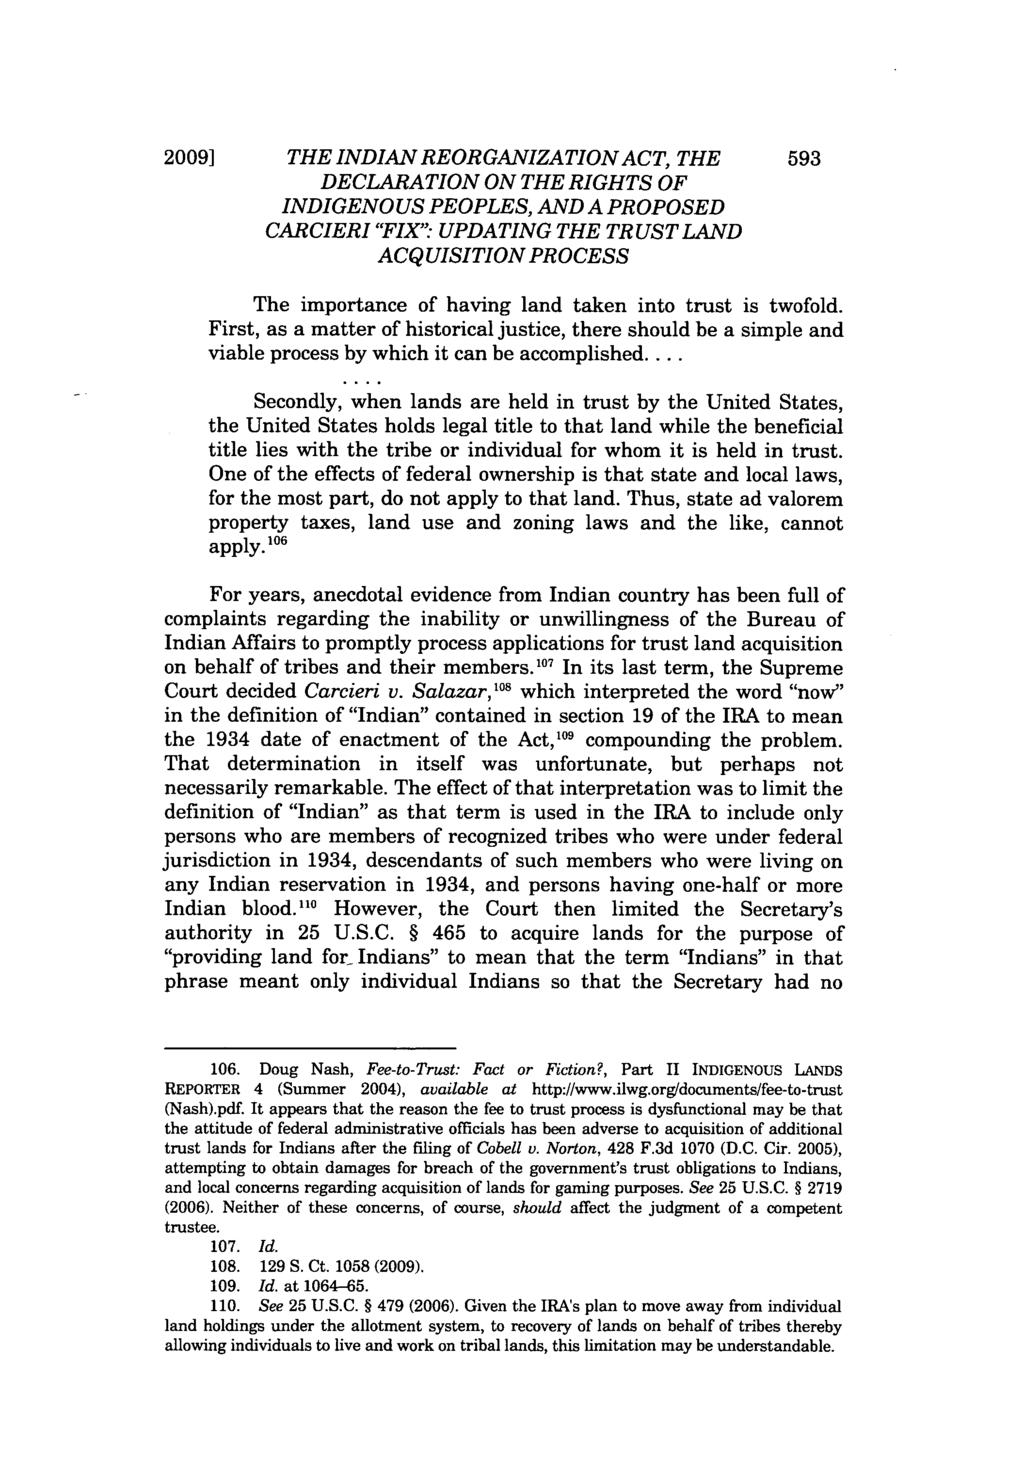 2009] THE INDIAN REORGANIZATION ACT, THE 593 DECLARATION ON THE RIGHTS OF INDIGENOUS PEOPLES, AND A PROPOSED CARCIERI "FIX" UPDATING THE TRUST LAND ACQUISITION PROCESS The importance of having land